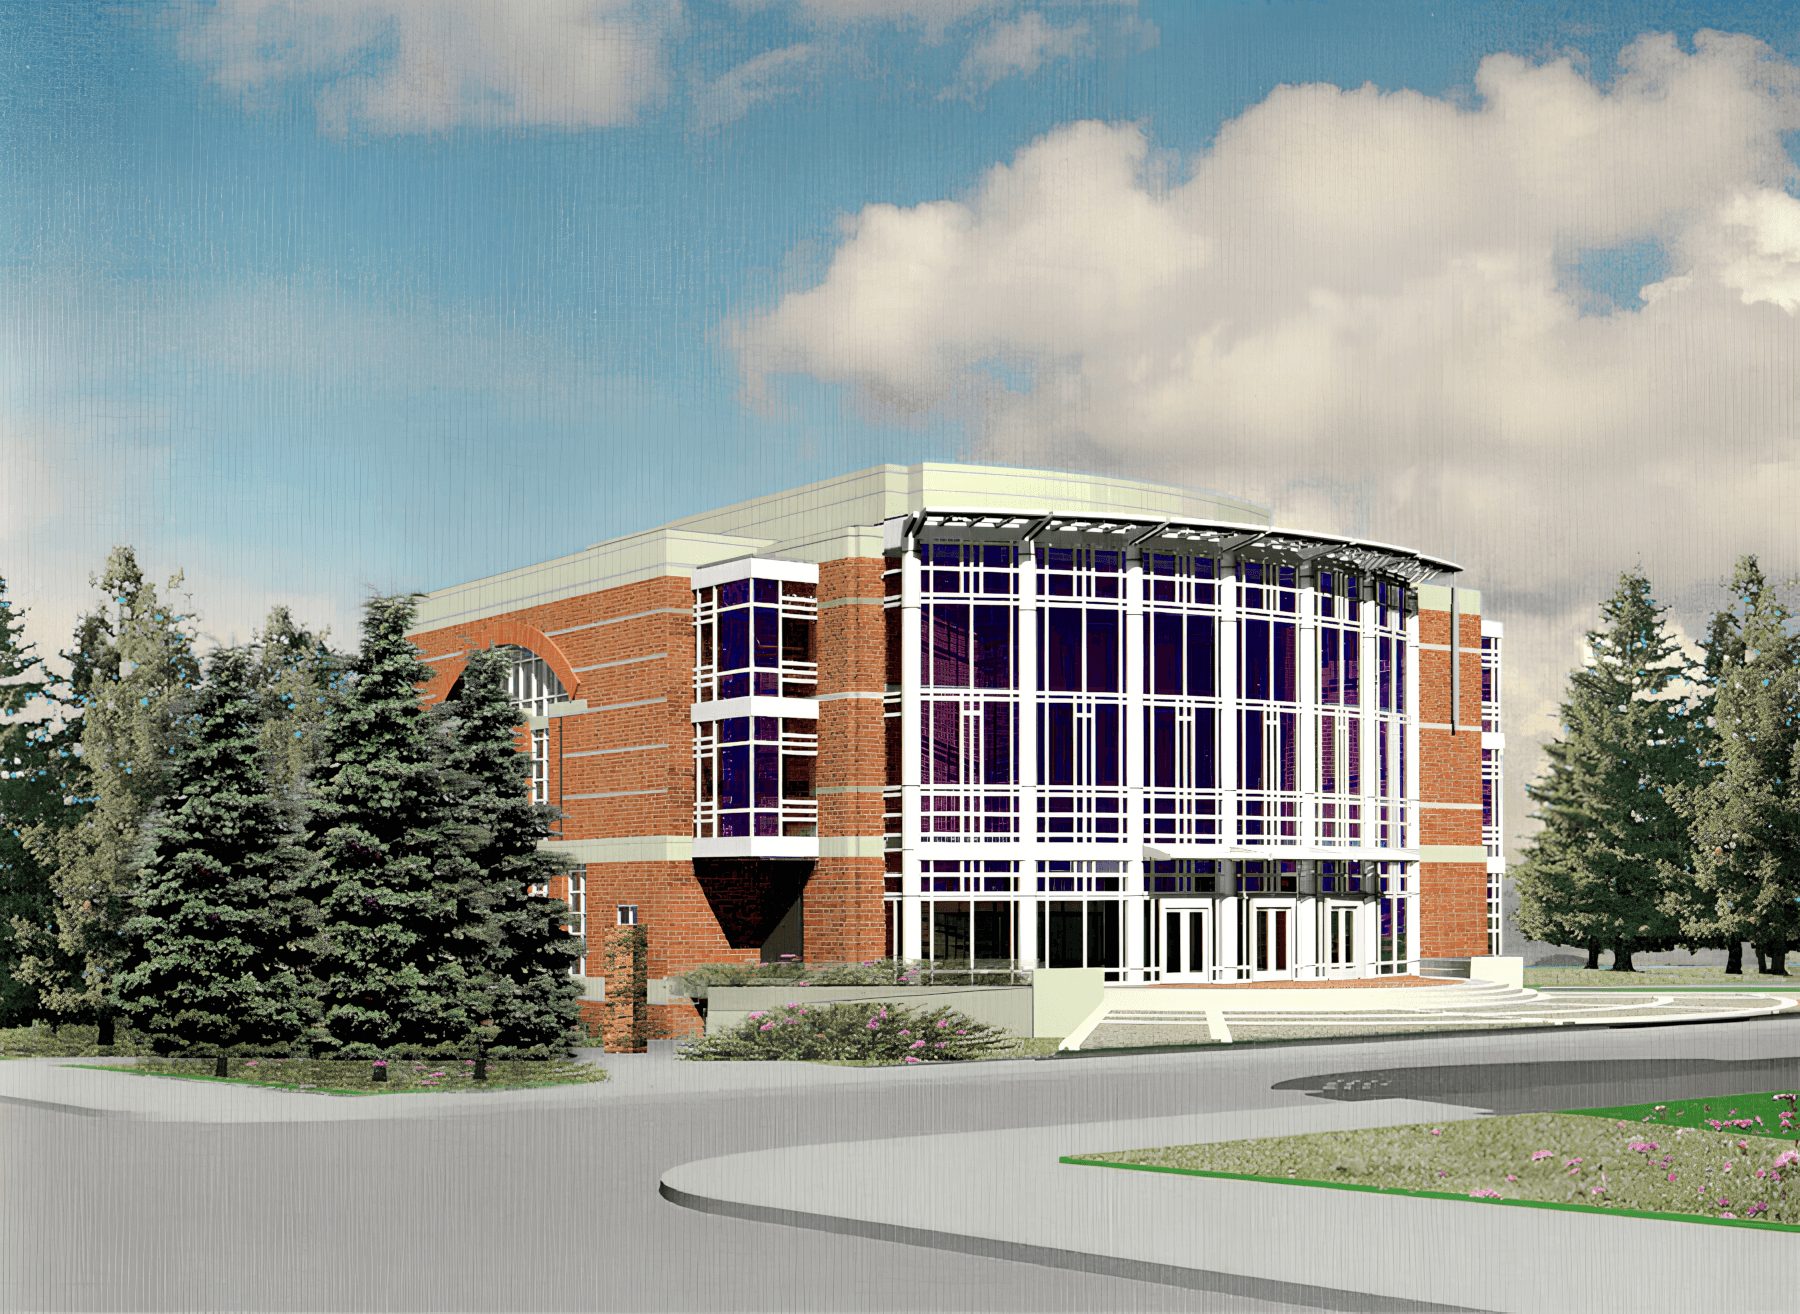 Rendered image of the Klamath County Courthouse Building, designed by architect Jeff Finsand.